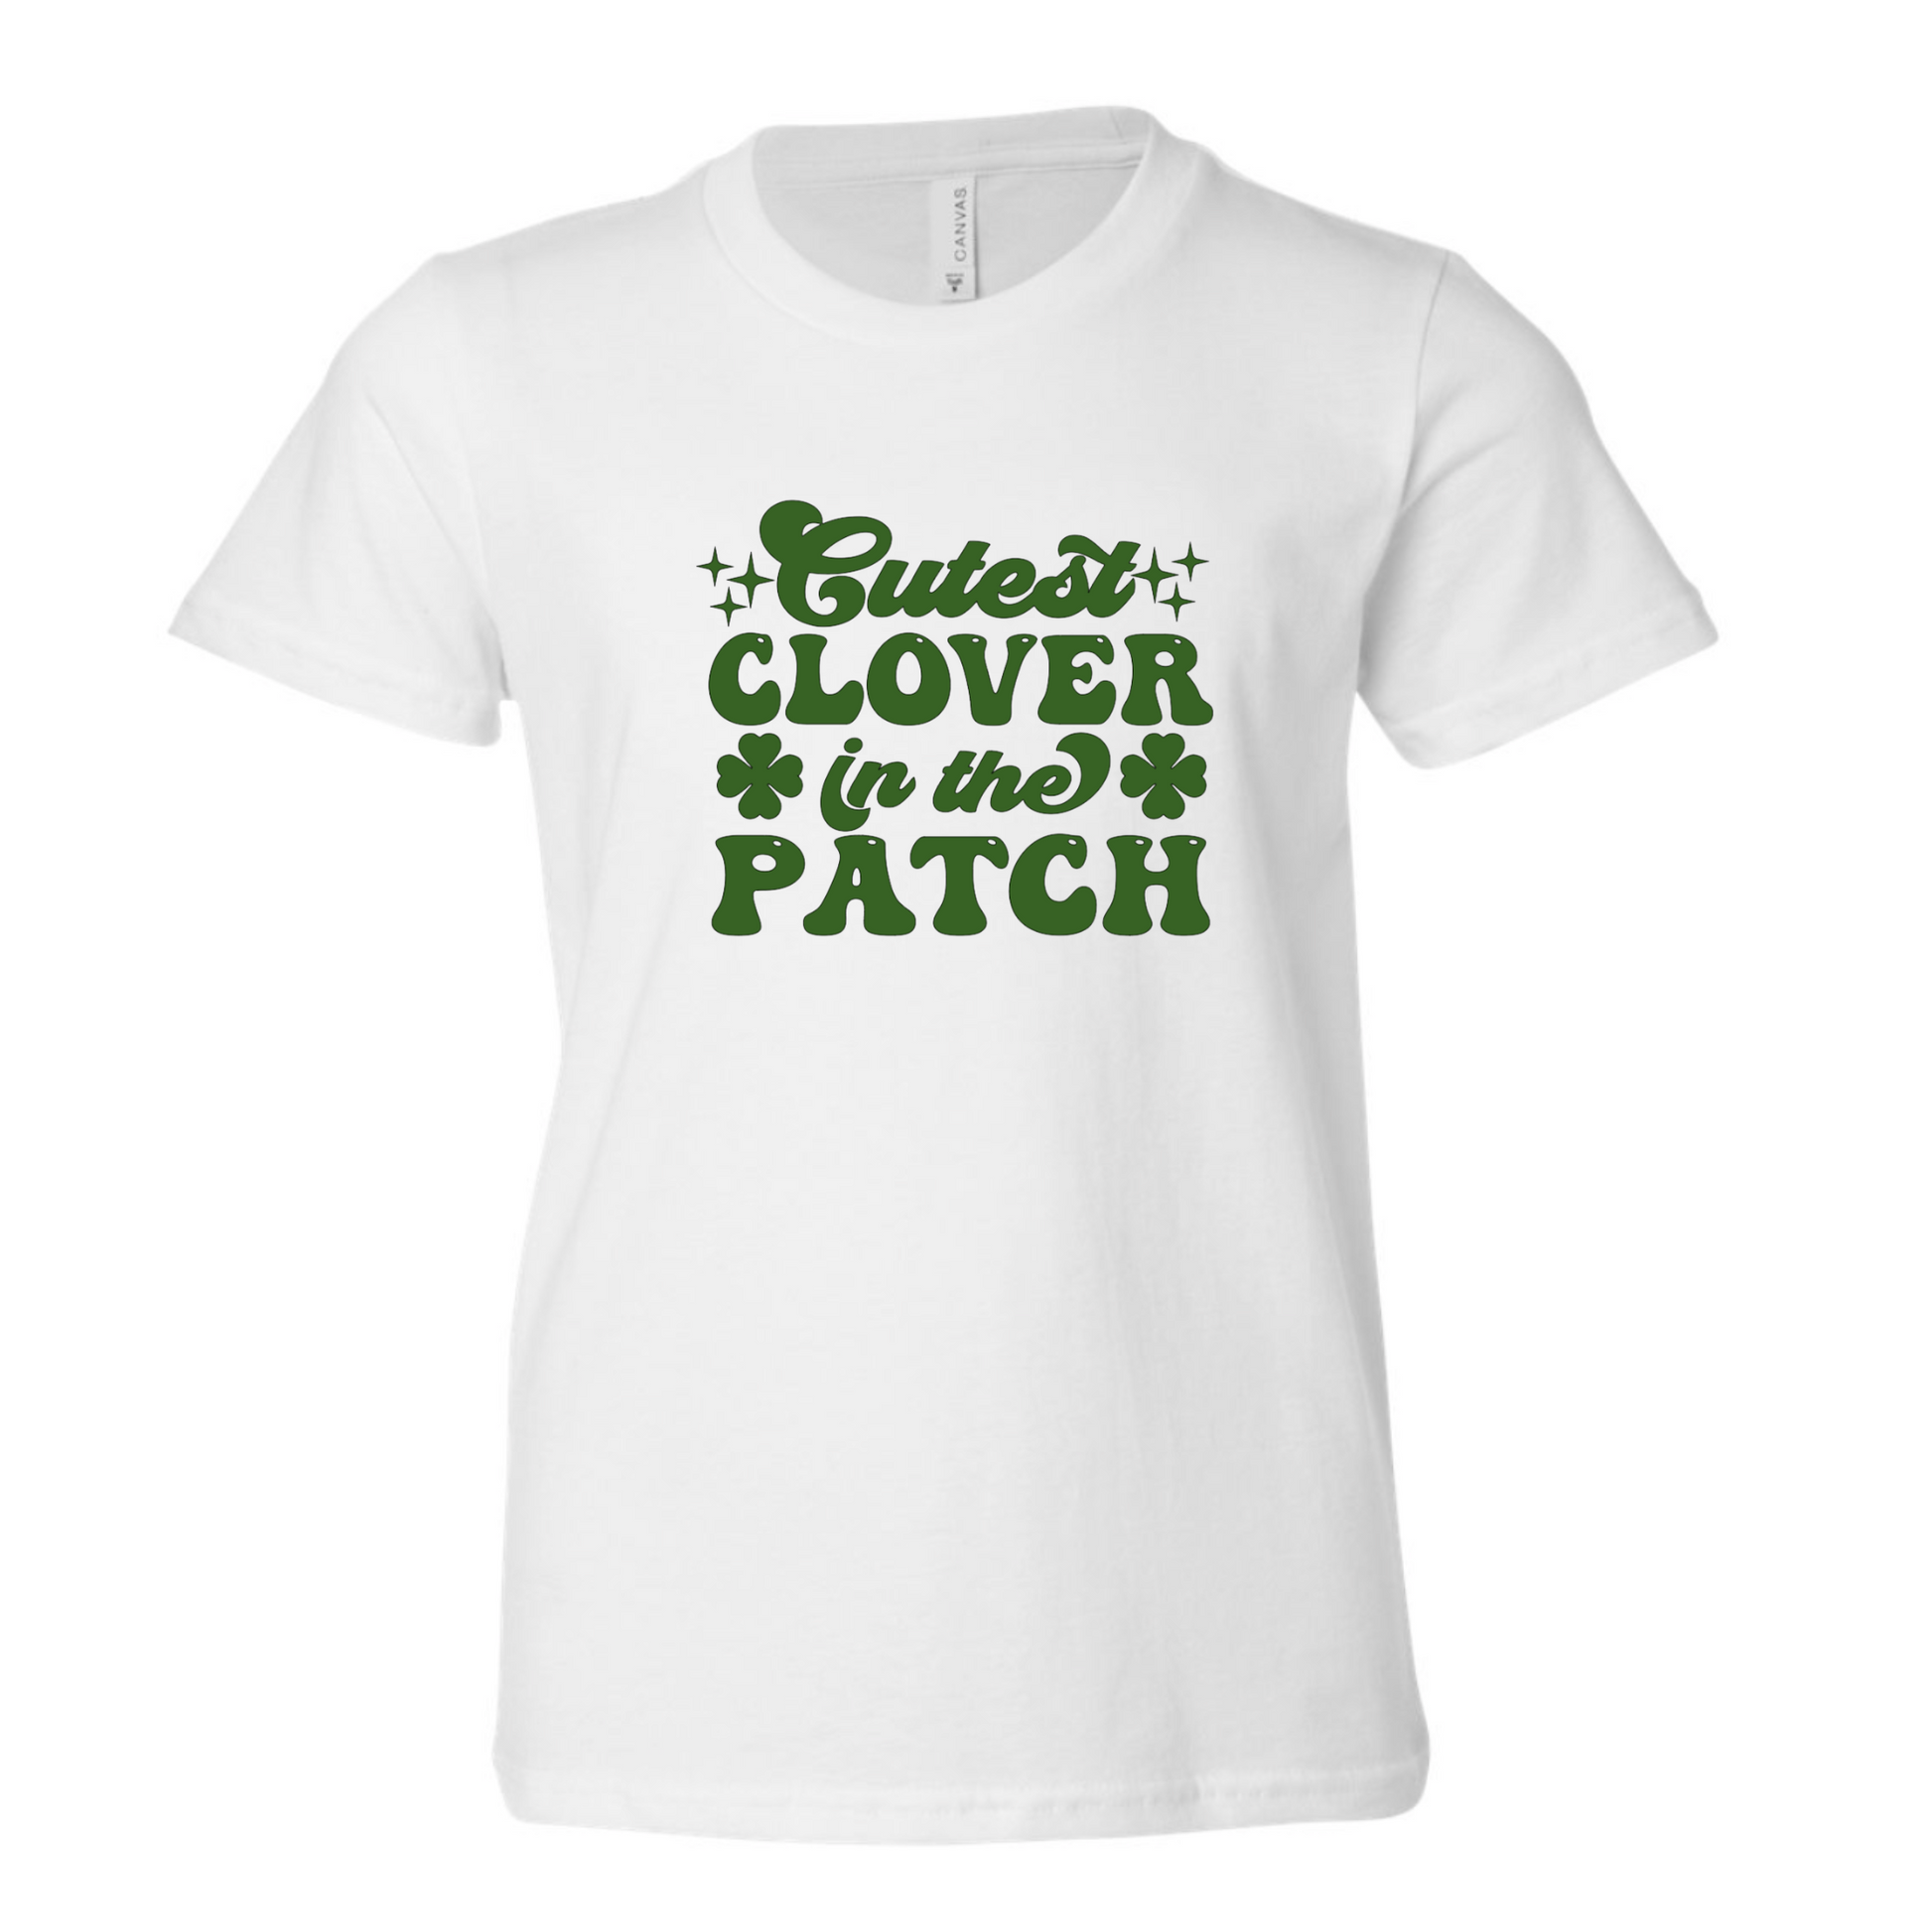 Cutest Clover In The Patch T-Shirt for youth and toddler in white. Adorable saying in green with twinkles and 4 leaf clovers. This is the front view of the shirt.